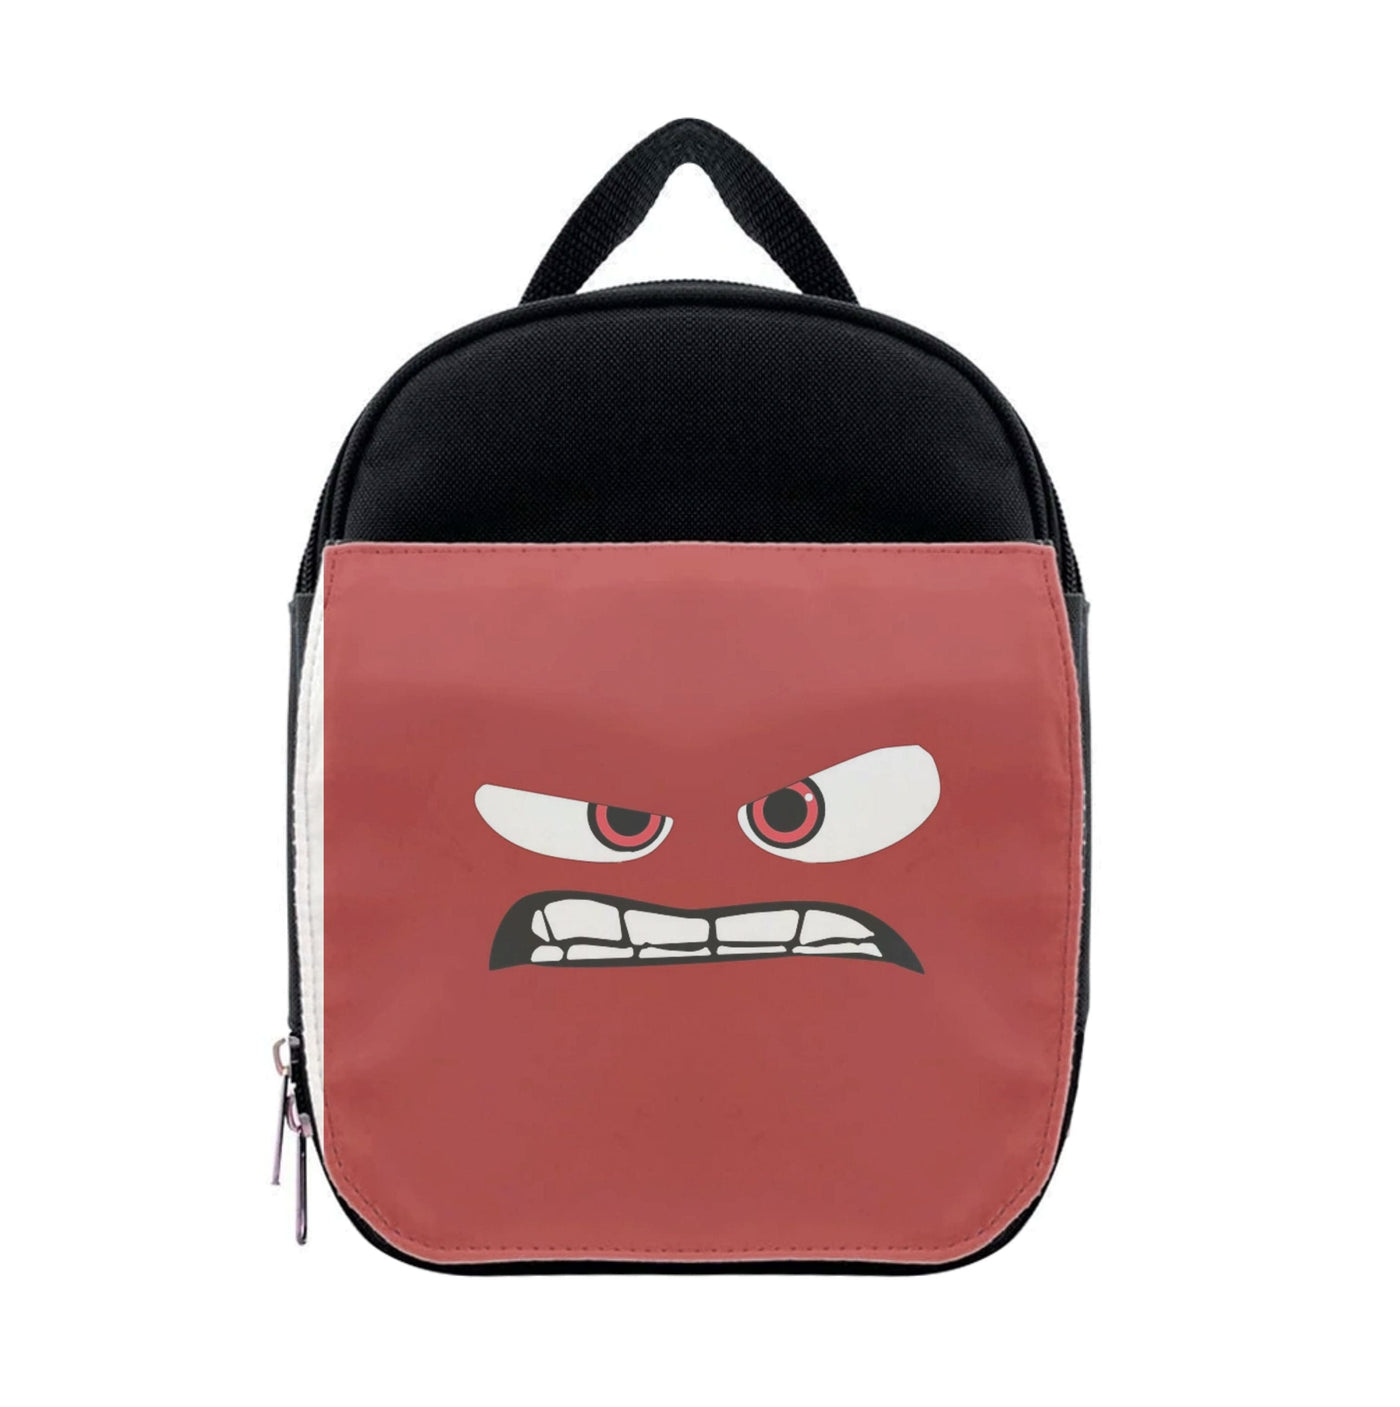 Anger - Inside Out Lunchbox